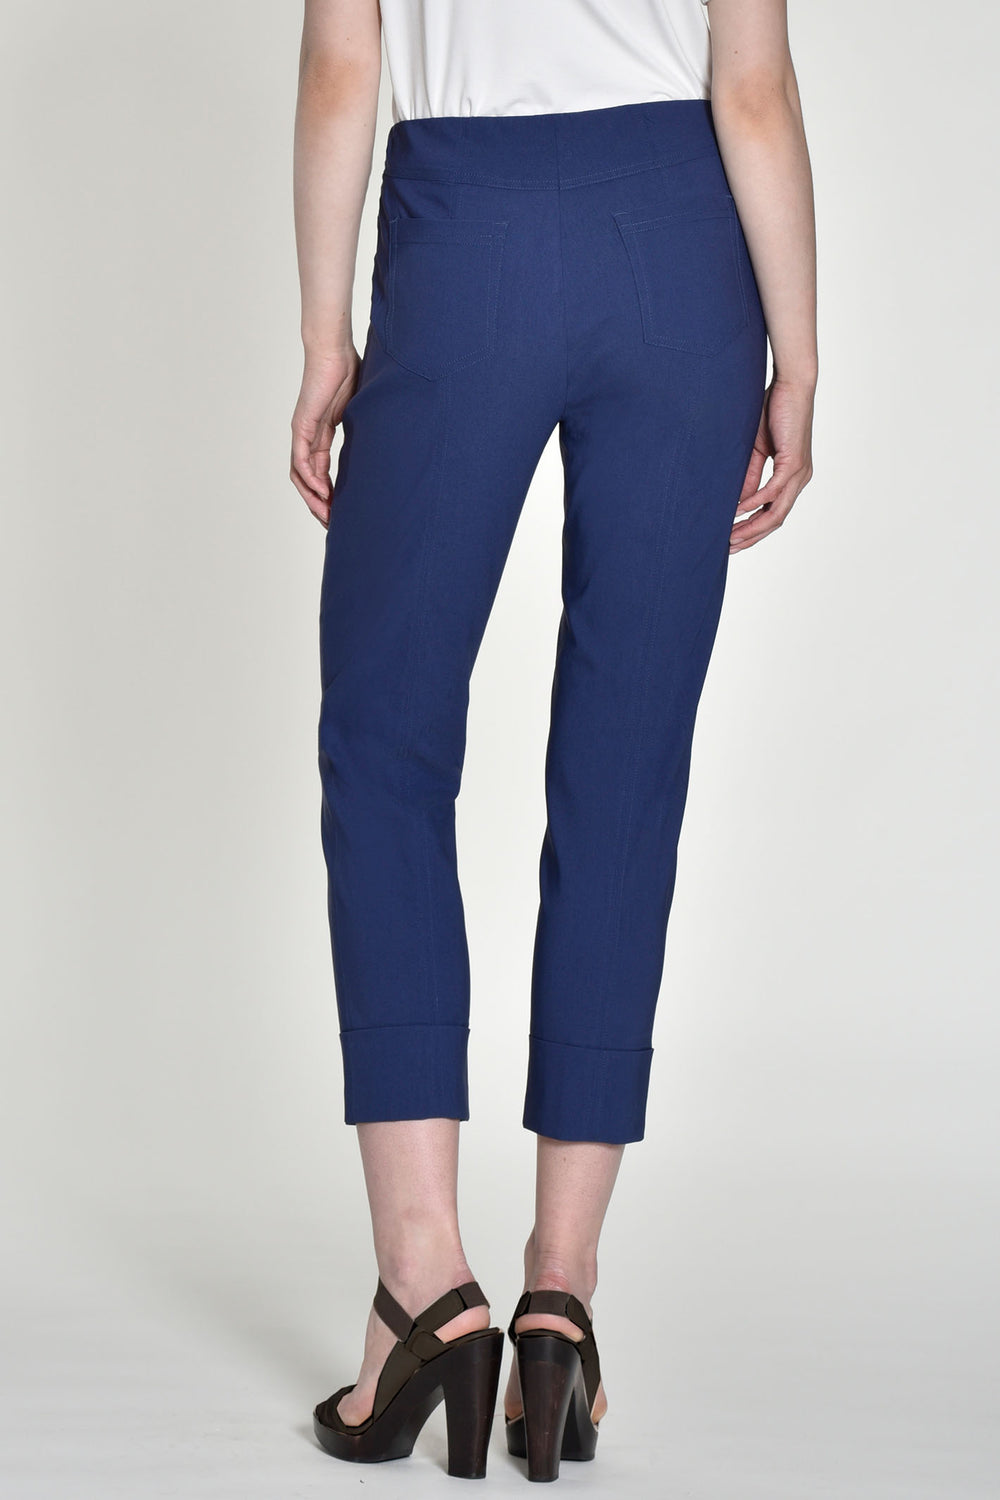 Robell 51568 68 Bella 09 Blue Cropped Trousers 68cm - Experience Boutique